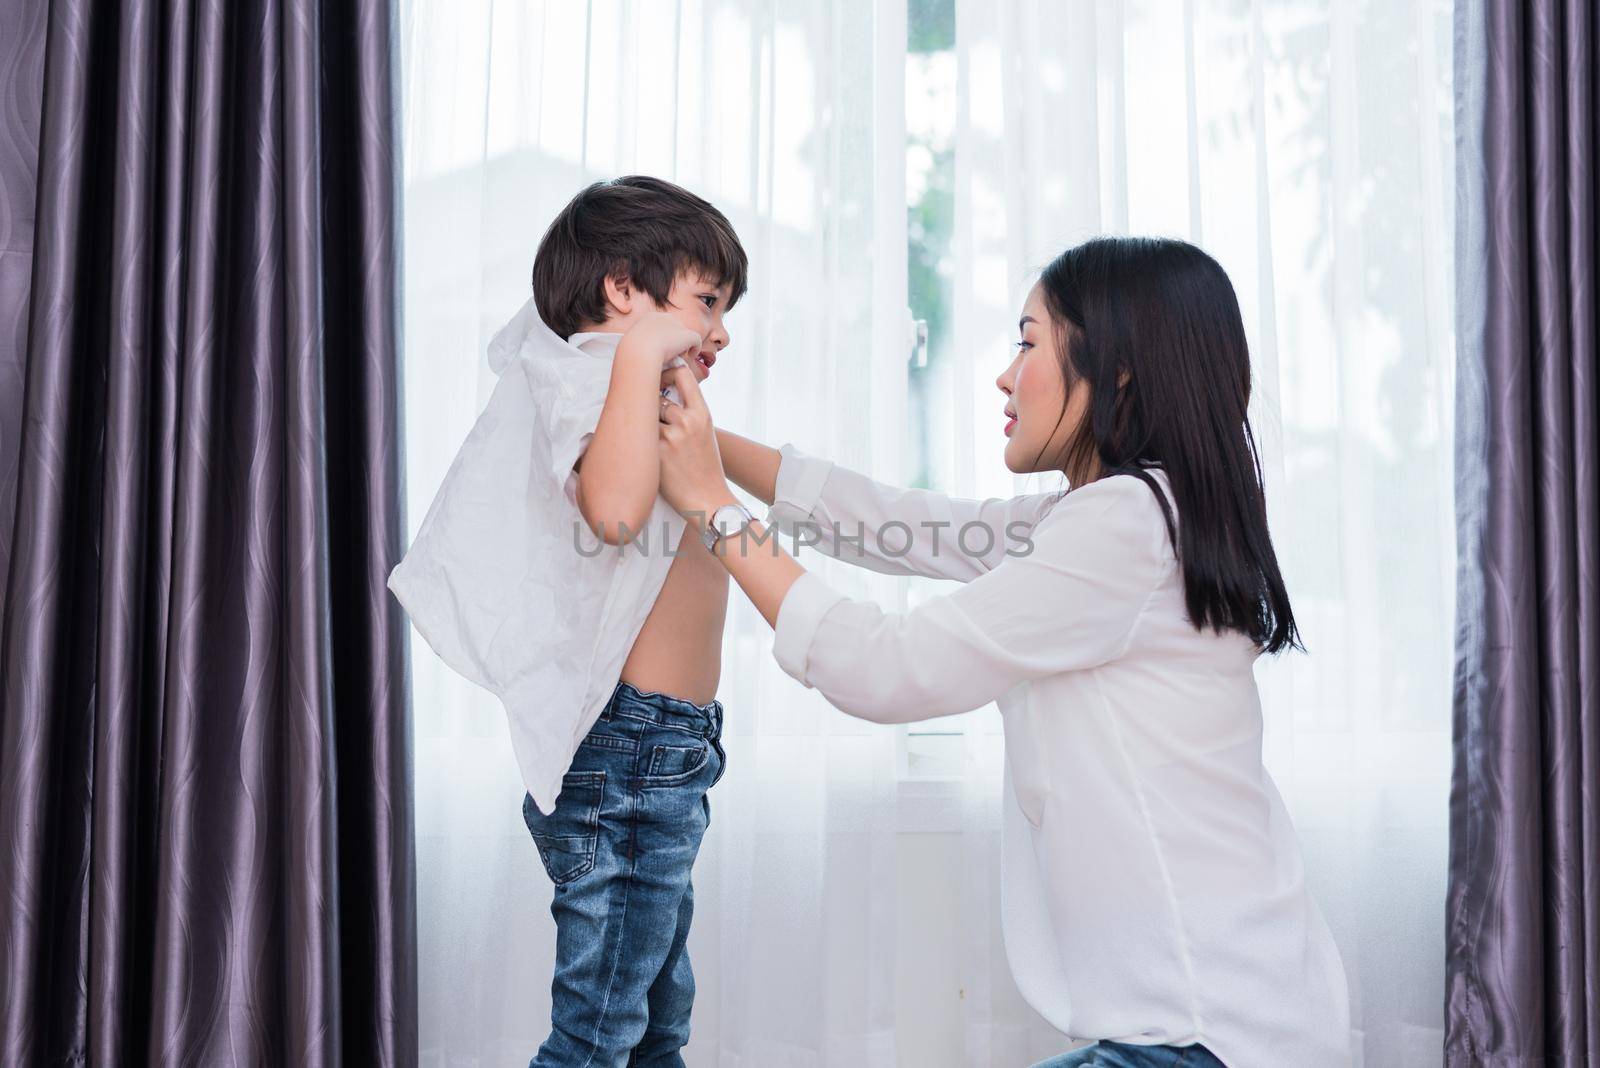 Young Asian mom dressed up son outfits for preparing go to school. Mother and son concept. Happy family and Home sweet home theme. Preschool and Back to school theme.